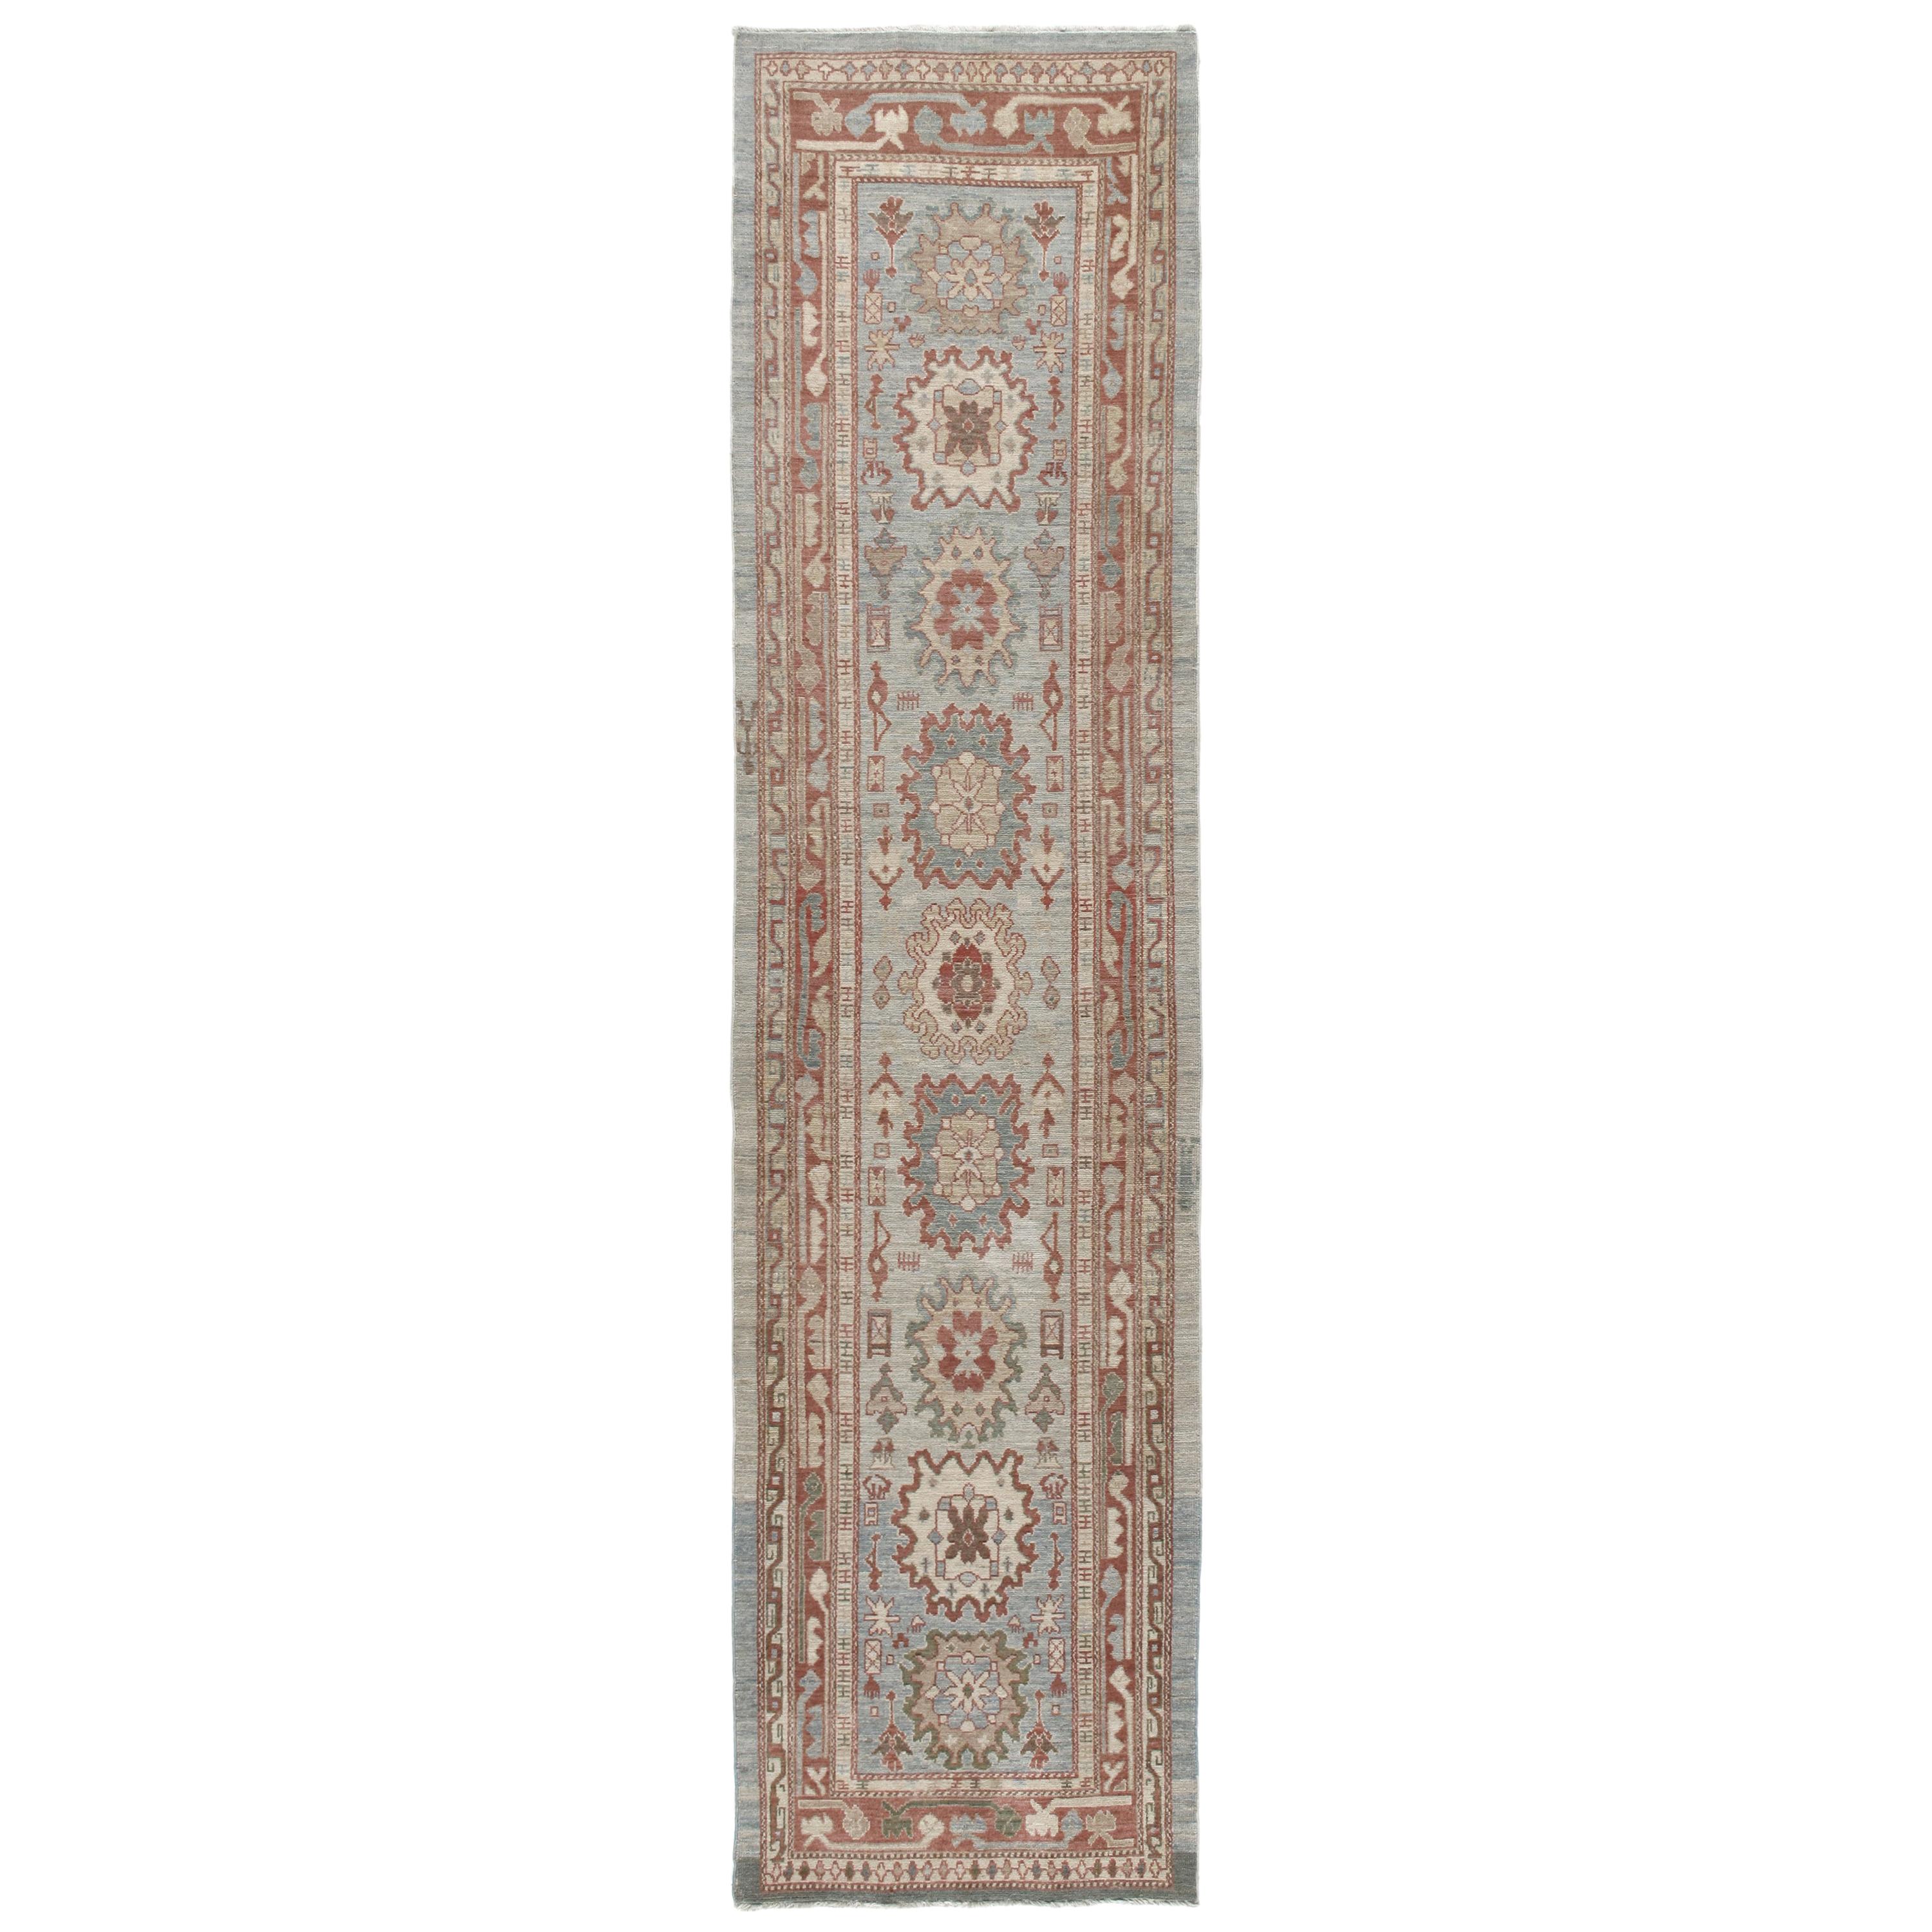 Persian Traditional Kurdish Hand Knotted Runner Rug in Blue, Camel, Rust Colors